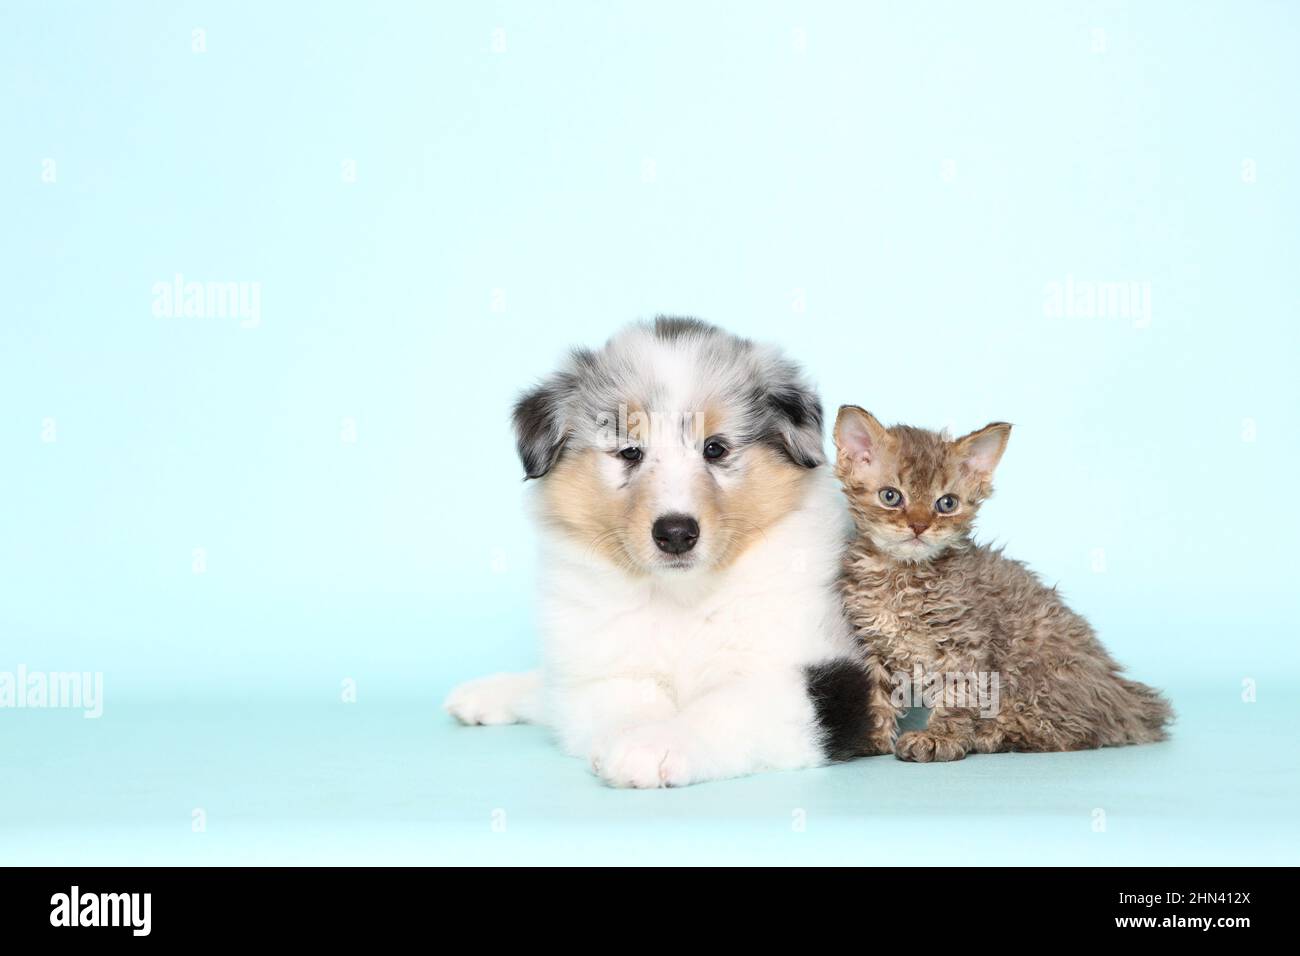 Selkirk Rex. Kitten and a American Collie puppy. Studio picture against a light-blue background. Germany Stock Photo